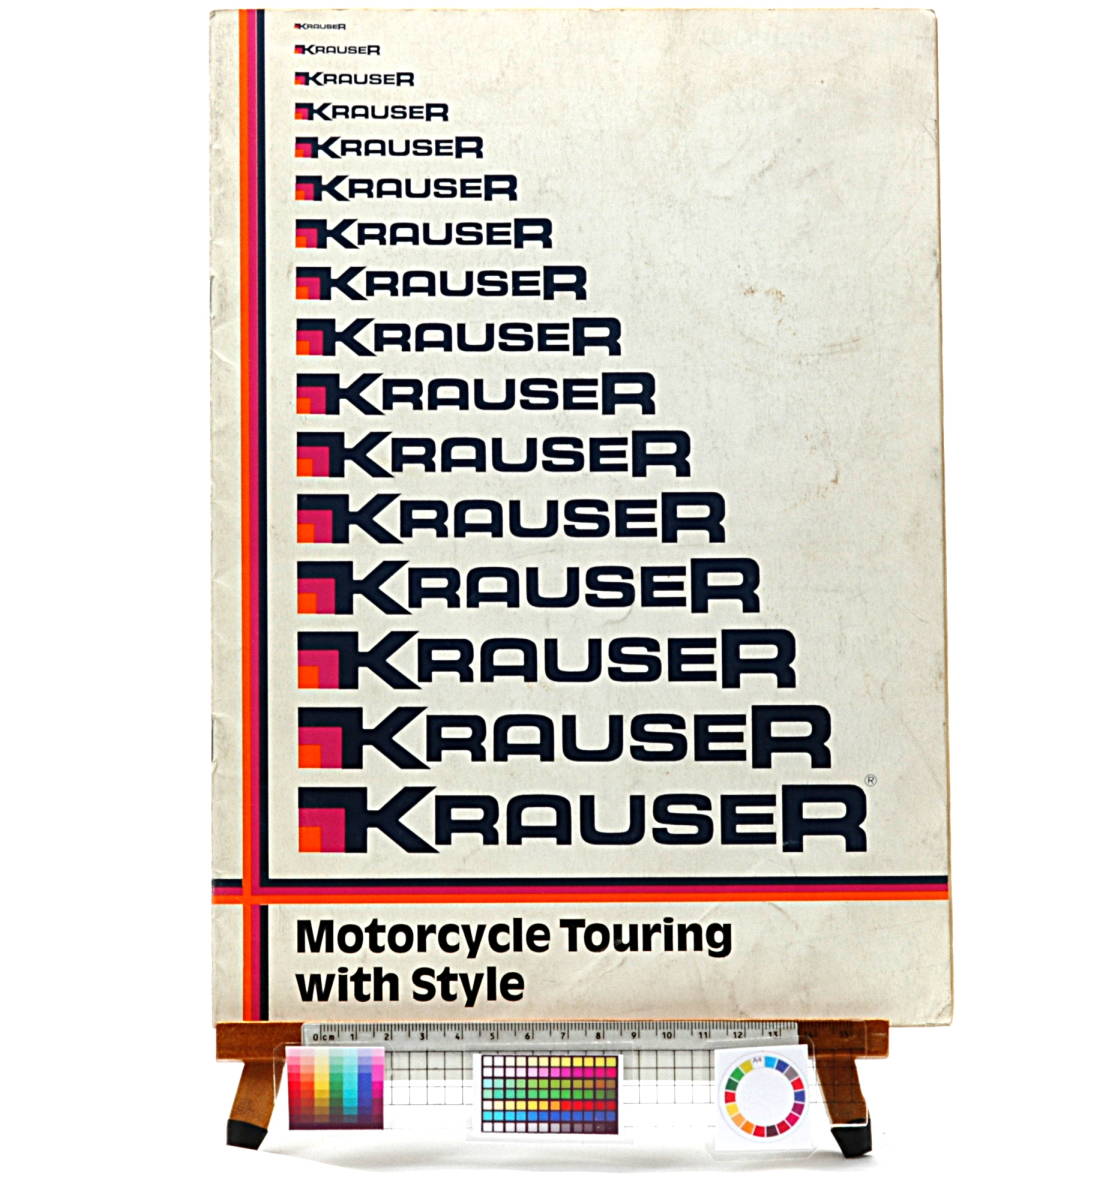 [Vintage] [Delivery Free]1990s KRAUSER Motorcycle Touring Style クラウザー モーターサイクル ツーリンググッズカタログ [tag9999]